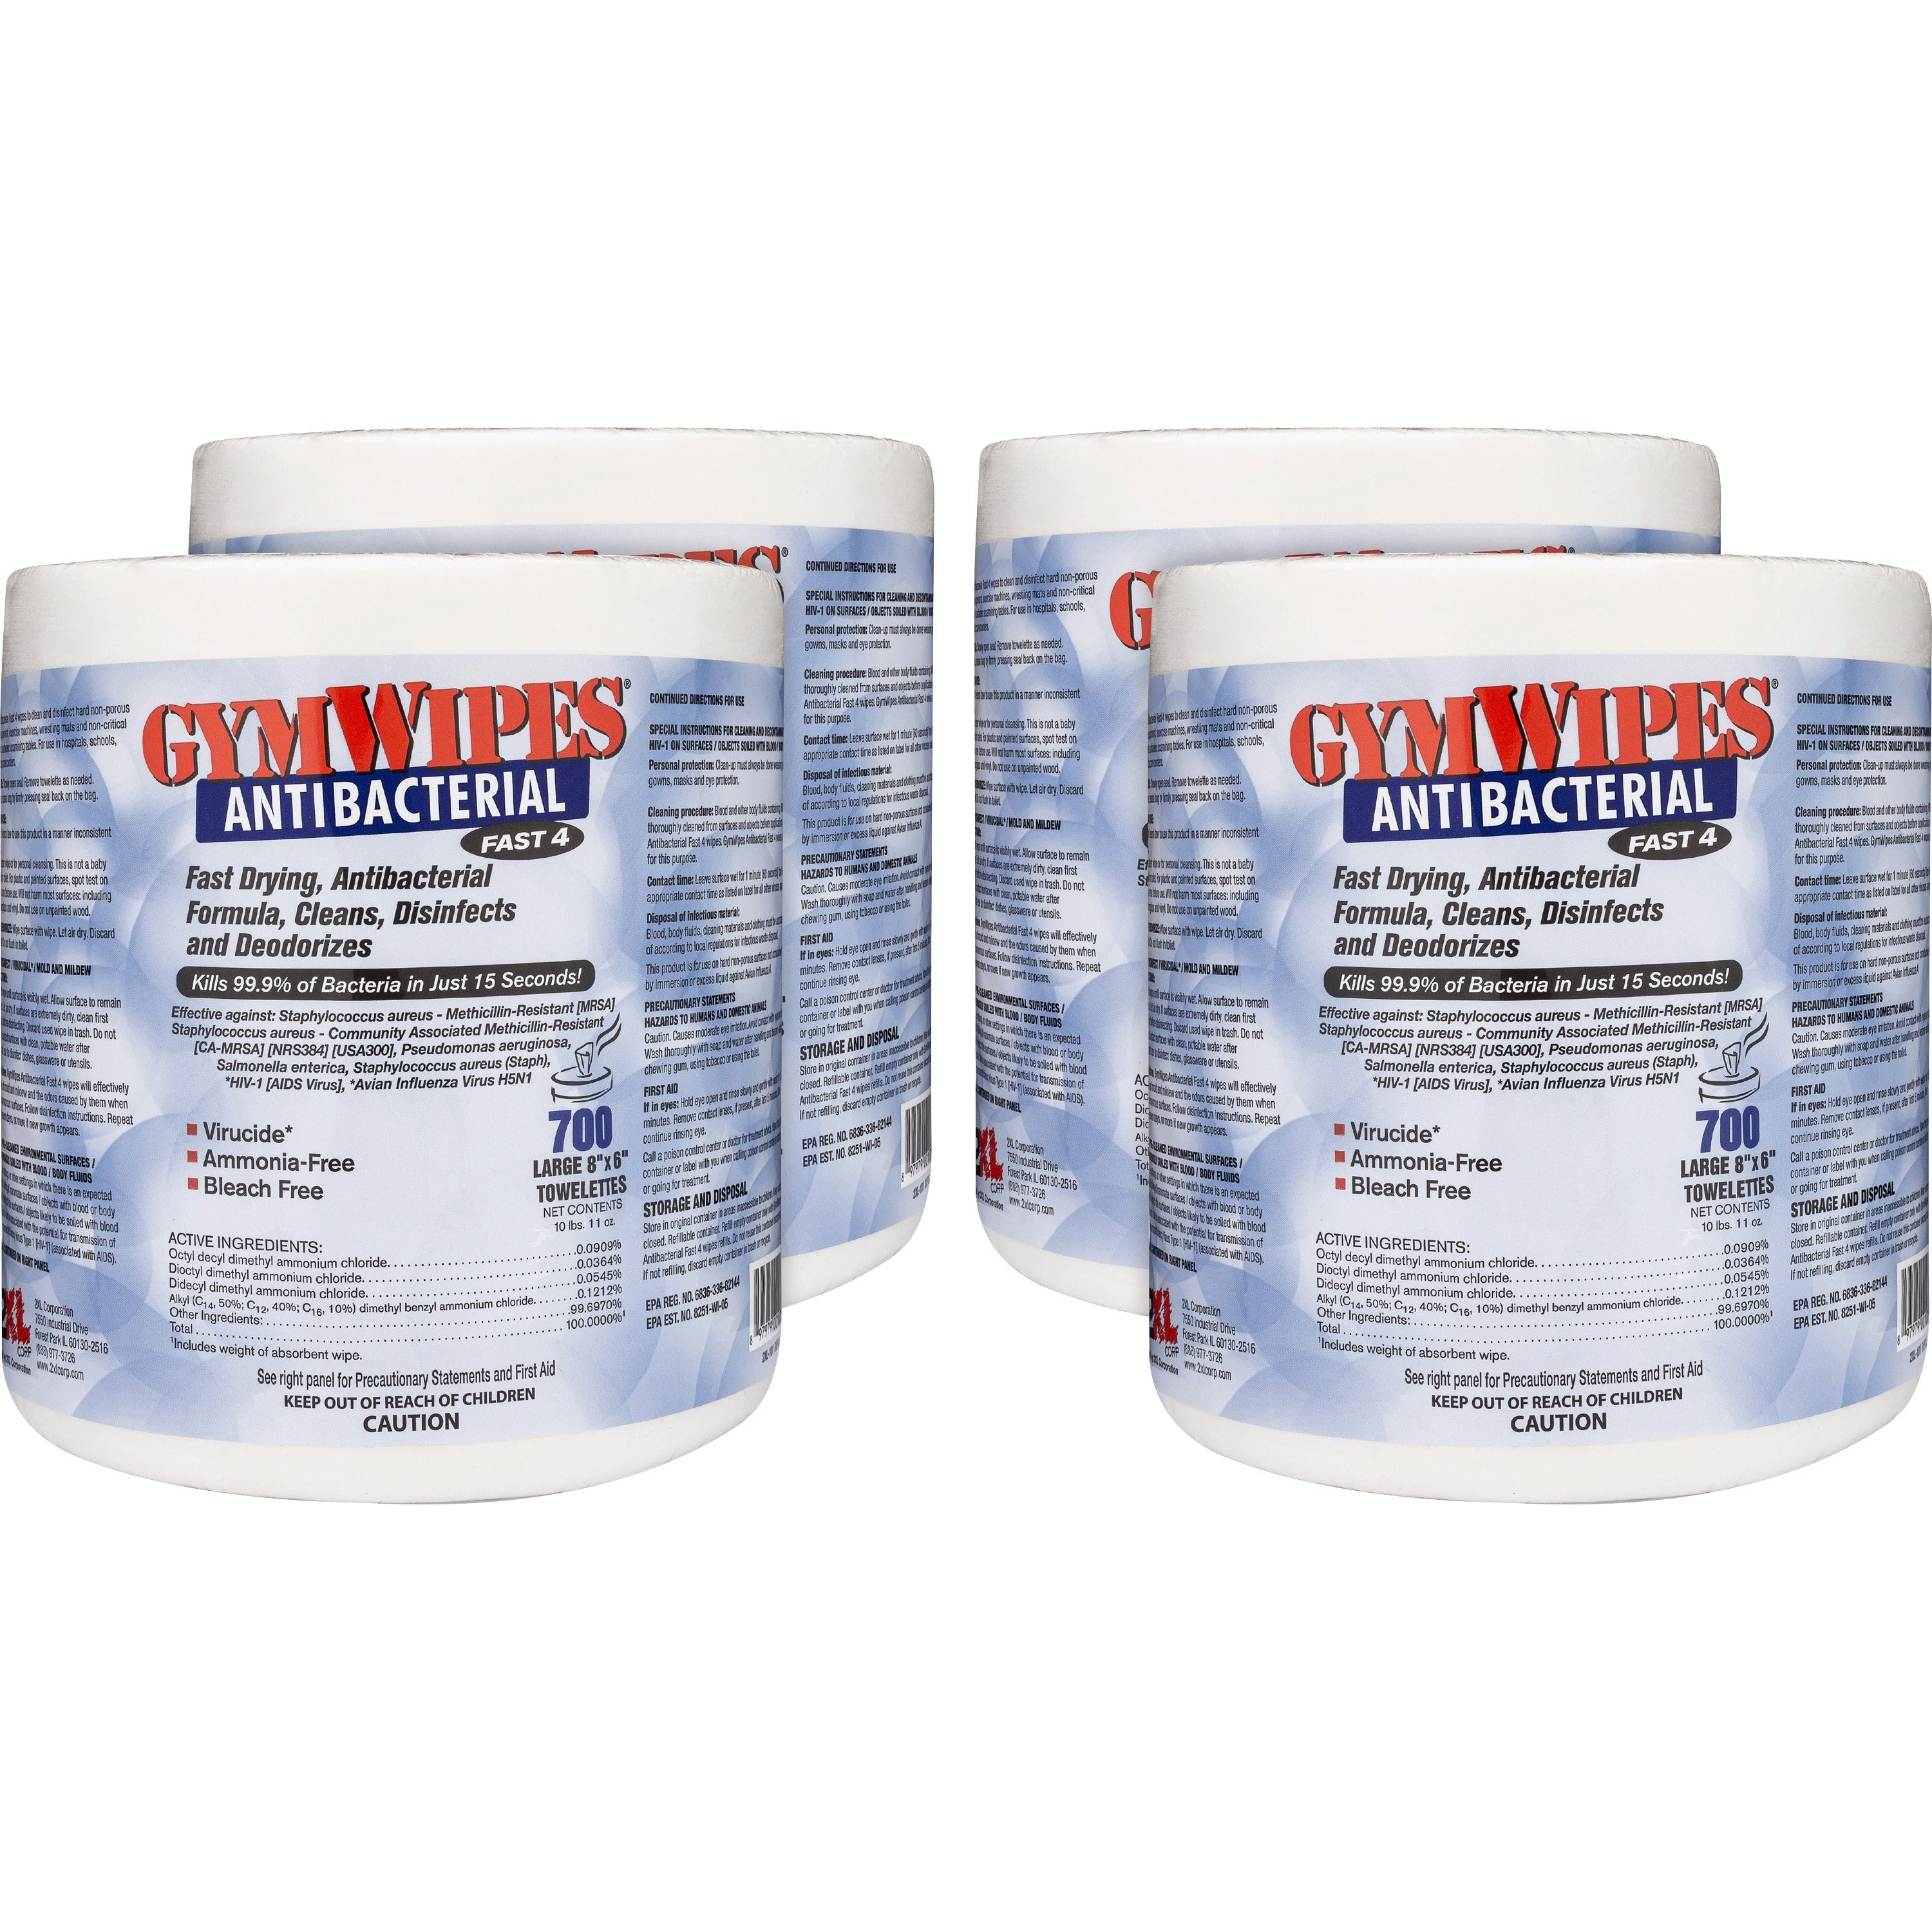 2xl-gymwipes-antibacterial-towelettes-bucket-refill-for-multi-surface-700-bag-4-carton-phenol-free-hygienic-anti-bacterial-disinfectant-disposable-bleach-free-alcohol-free-disposable-absorbent-white_txll101ct - 1